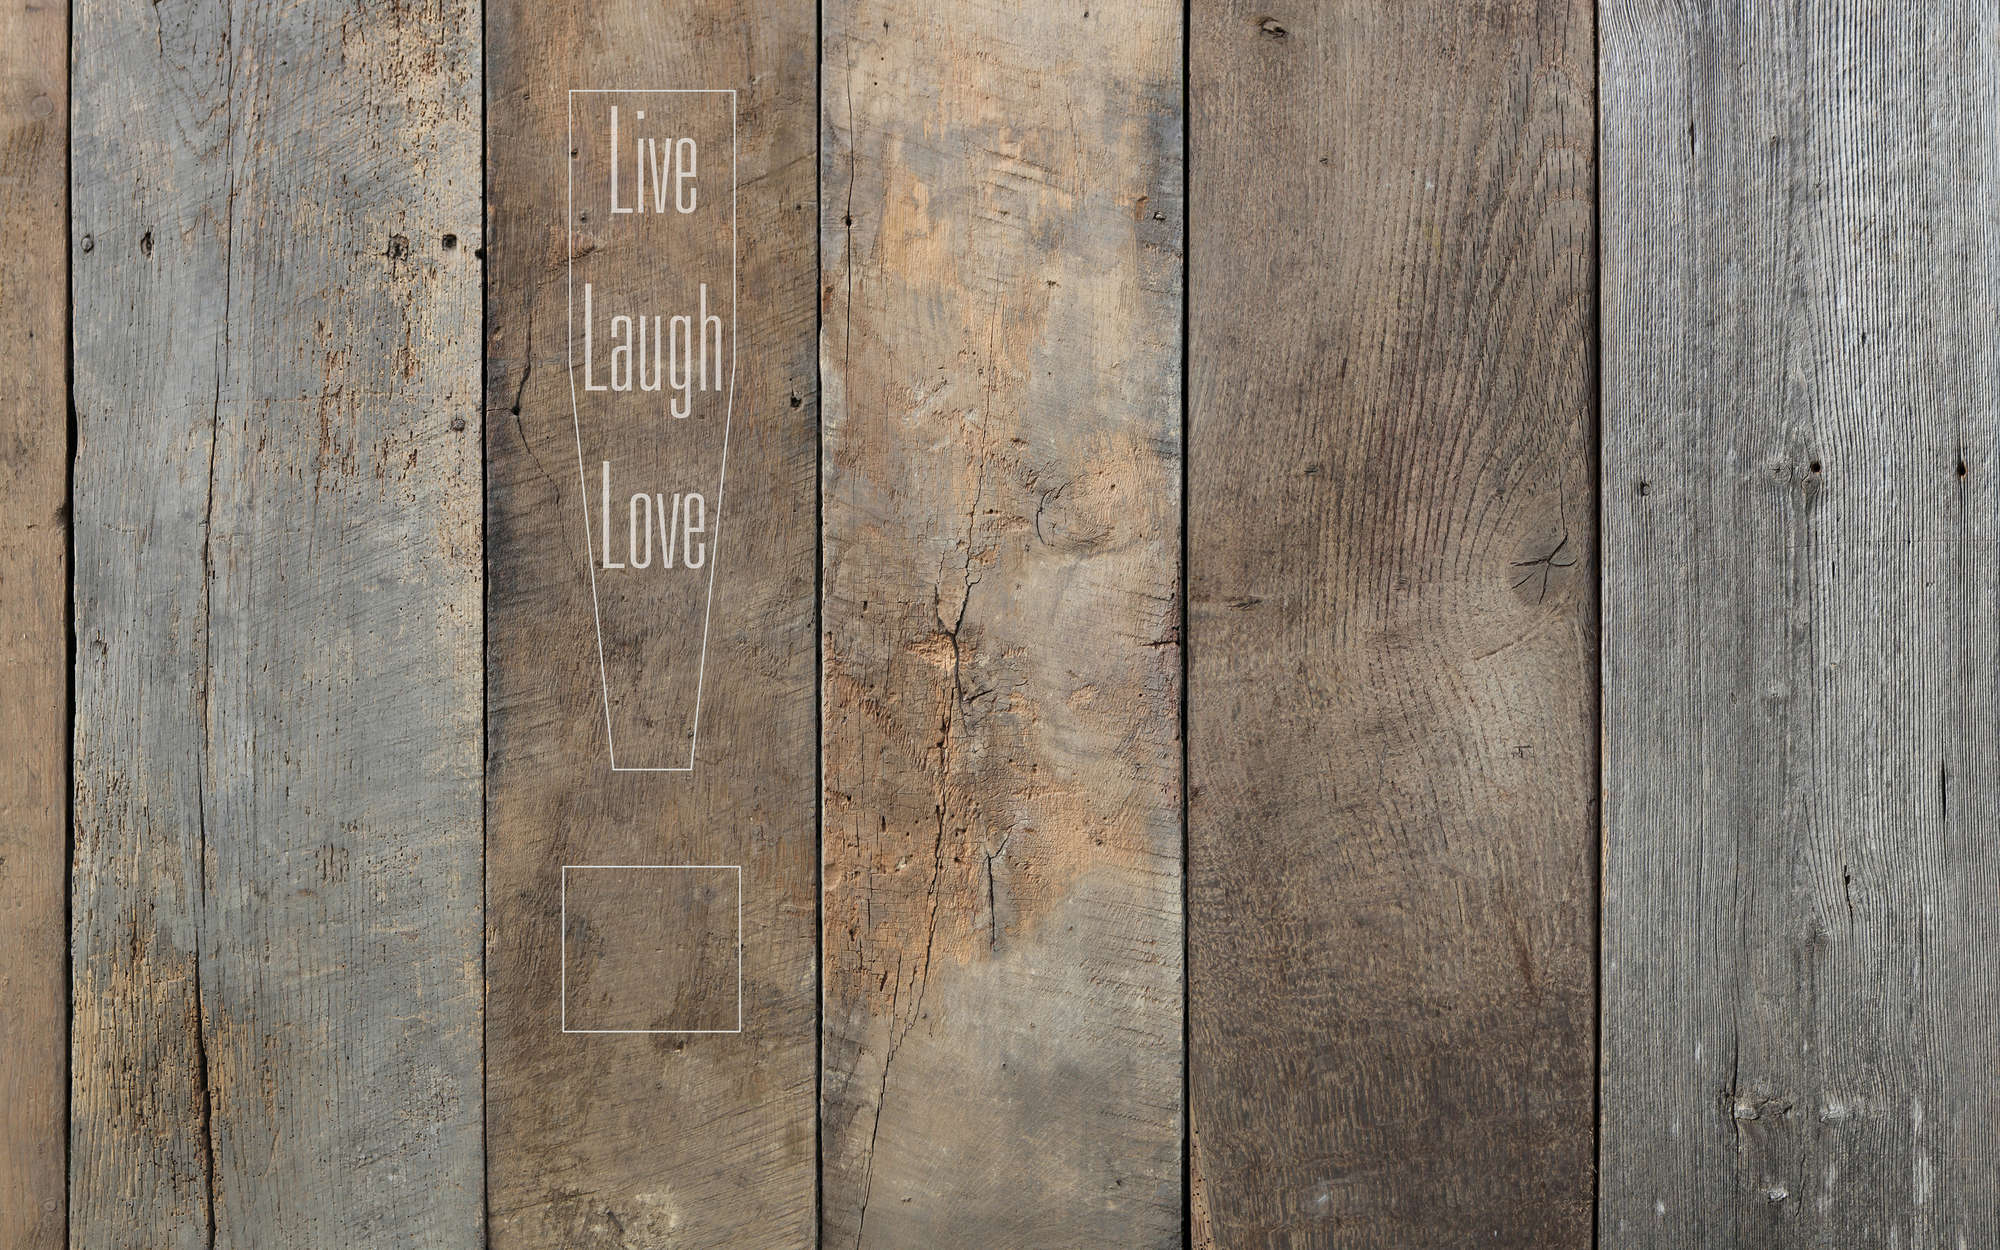             Photo wallpaper old wooden floorboards with lettering - textured non-woven
        